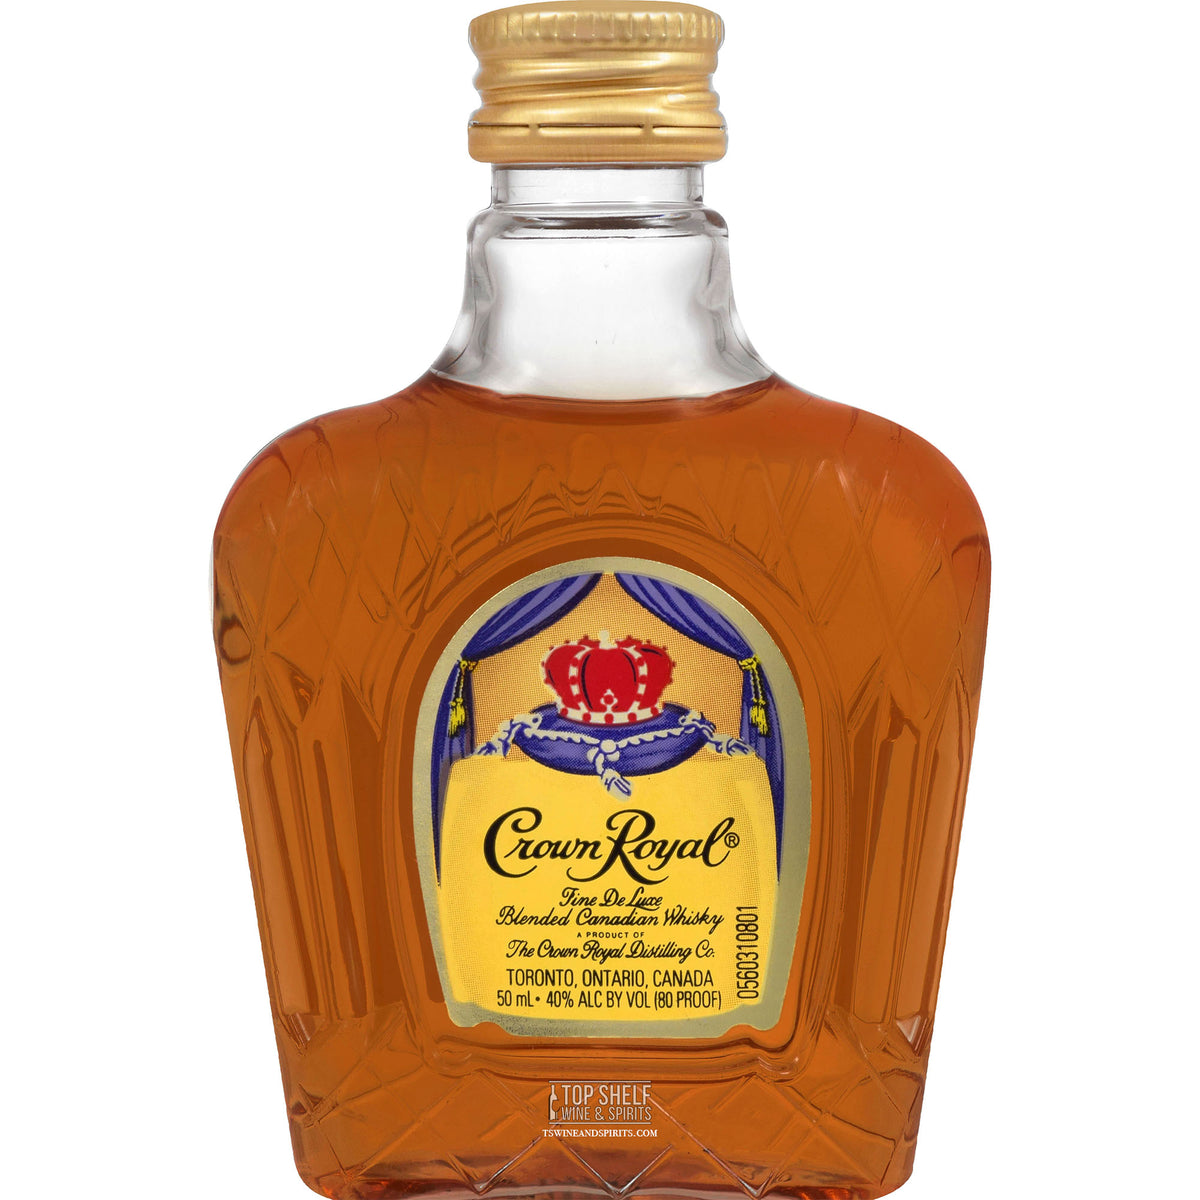 Buy Black Canadian whisky, 1 L, Canada Ontario, Canadian Whisky, Montreal Duty Free